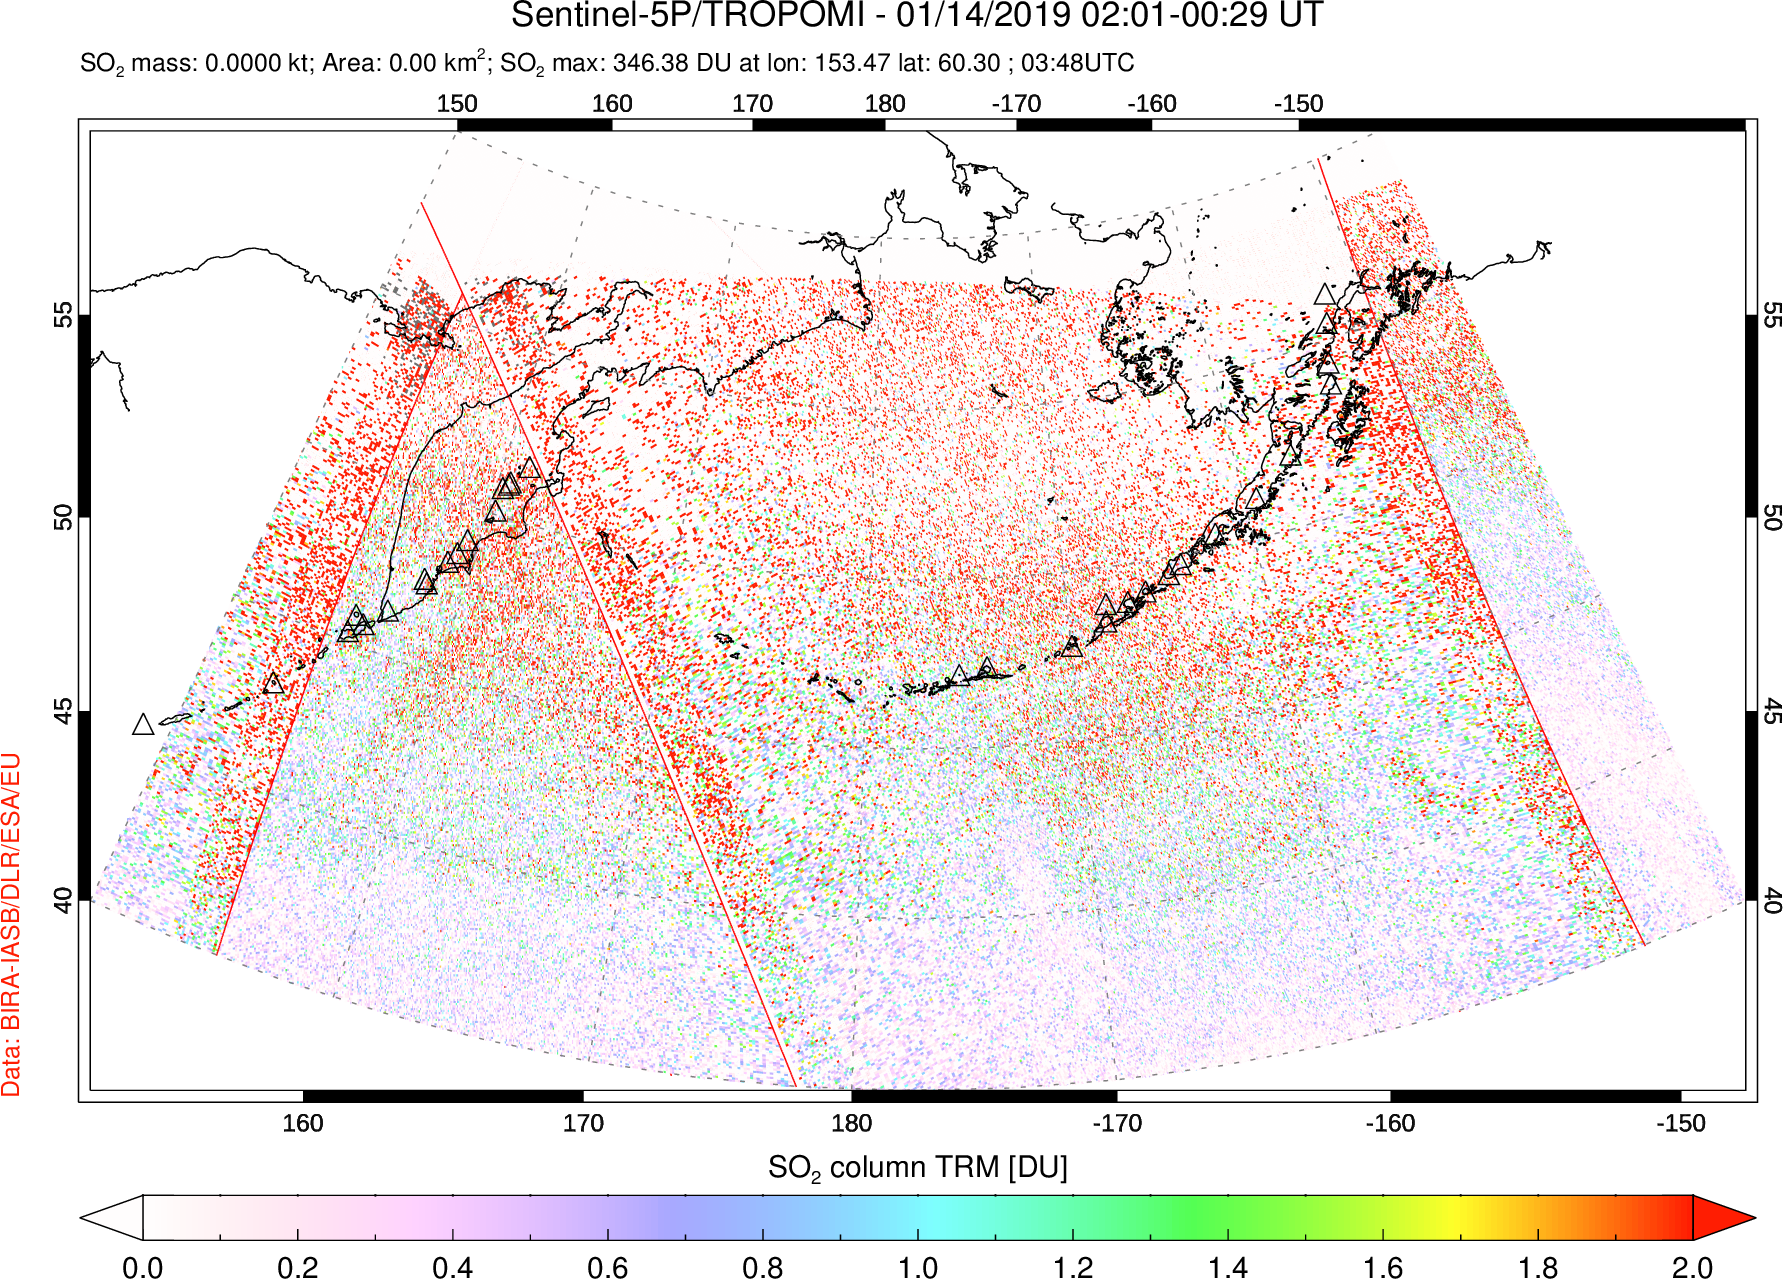 A sulfur dioxide image over North Pacific on Jan 14, 2019.